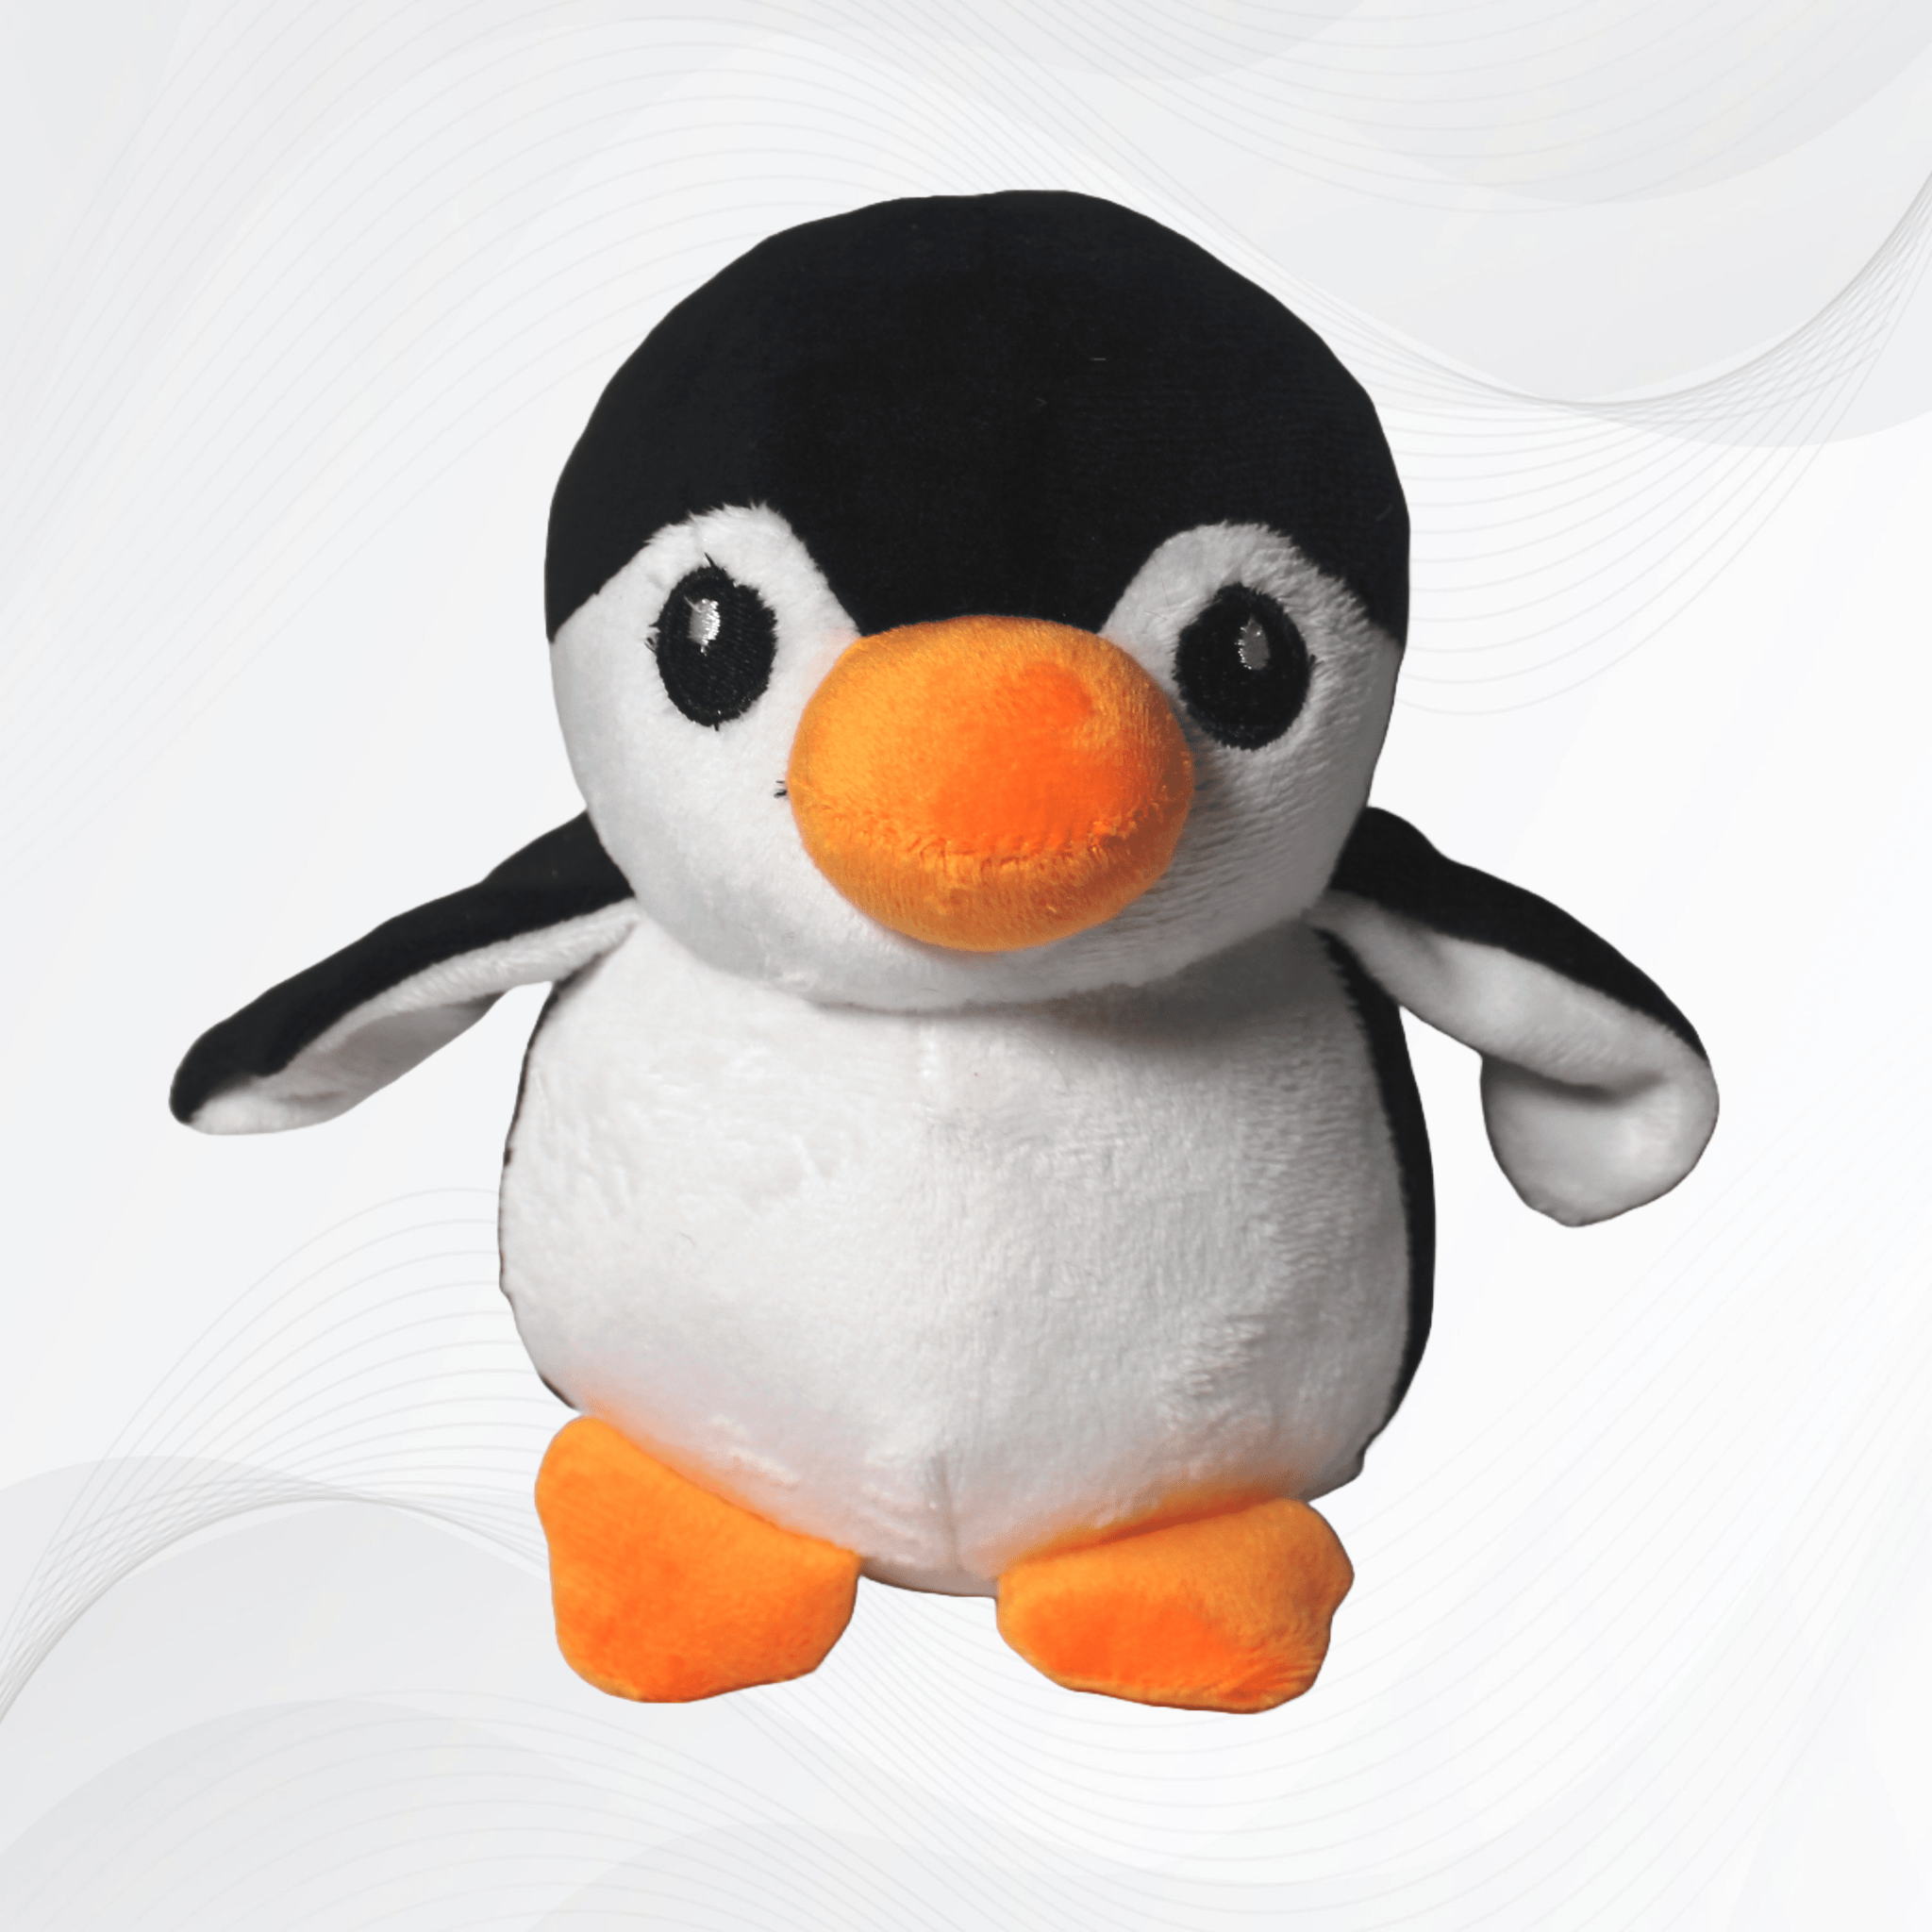 DyneJoy Penguin Animal Stuffed Toy - Soft Plush Toy for Kids - Washable - 18cm – Lightweight(Pack of 1)